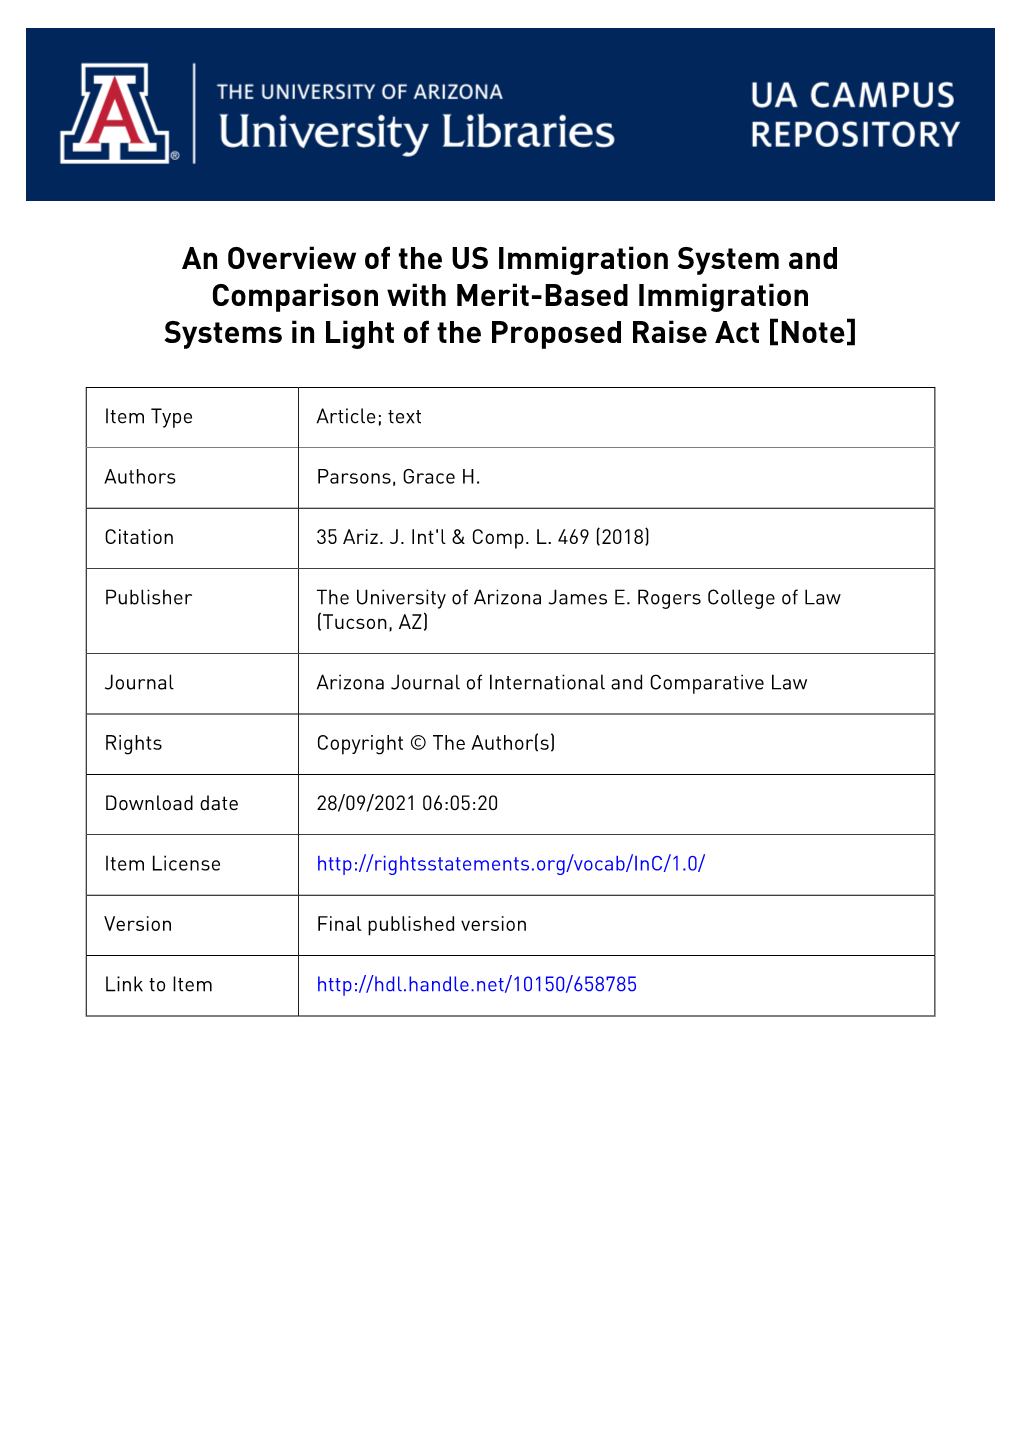 An Overview of the US Immigration System and Comparison with Merit-Based Immigration Systems in Light of the Proposed Raise Act [Note]